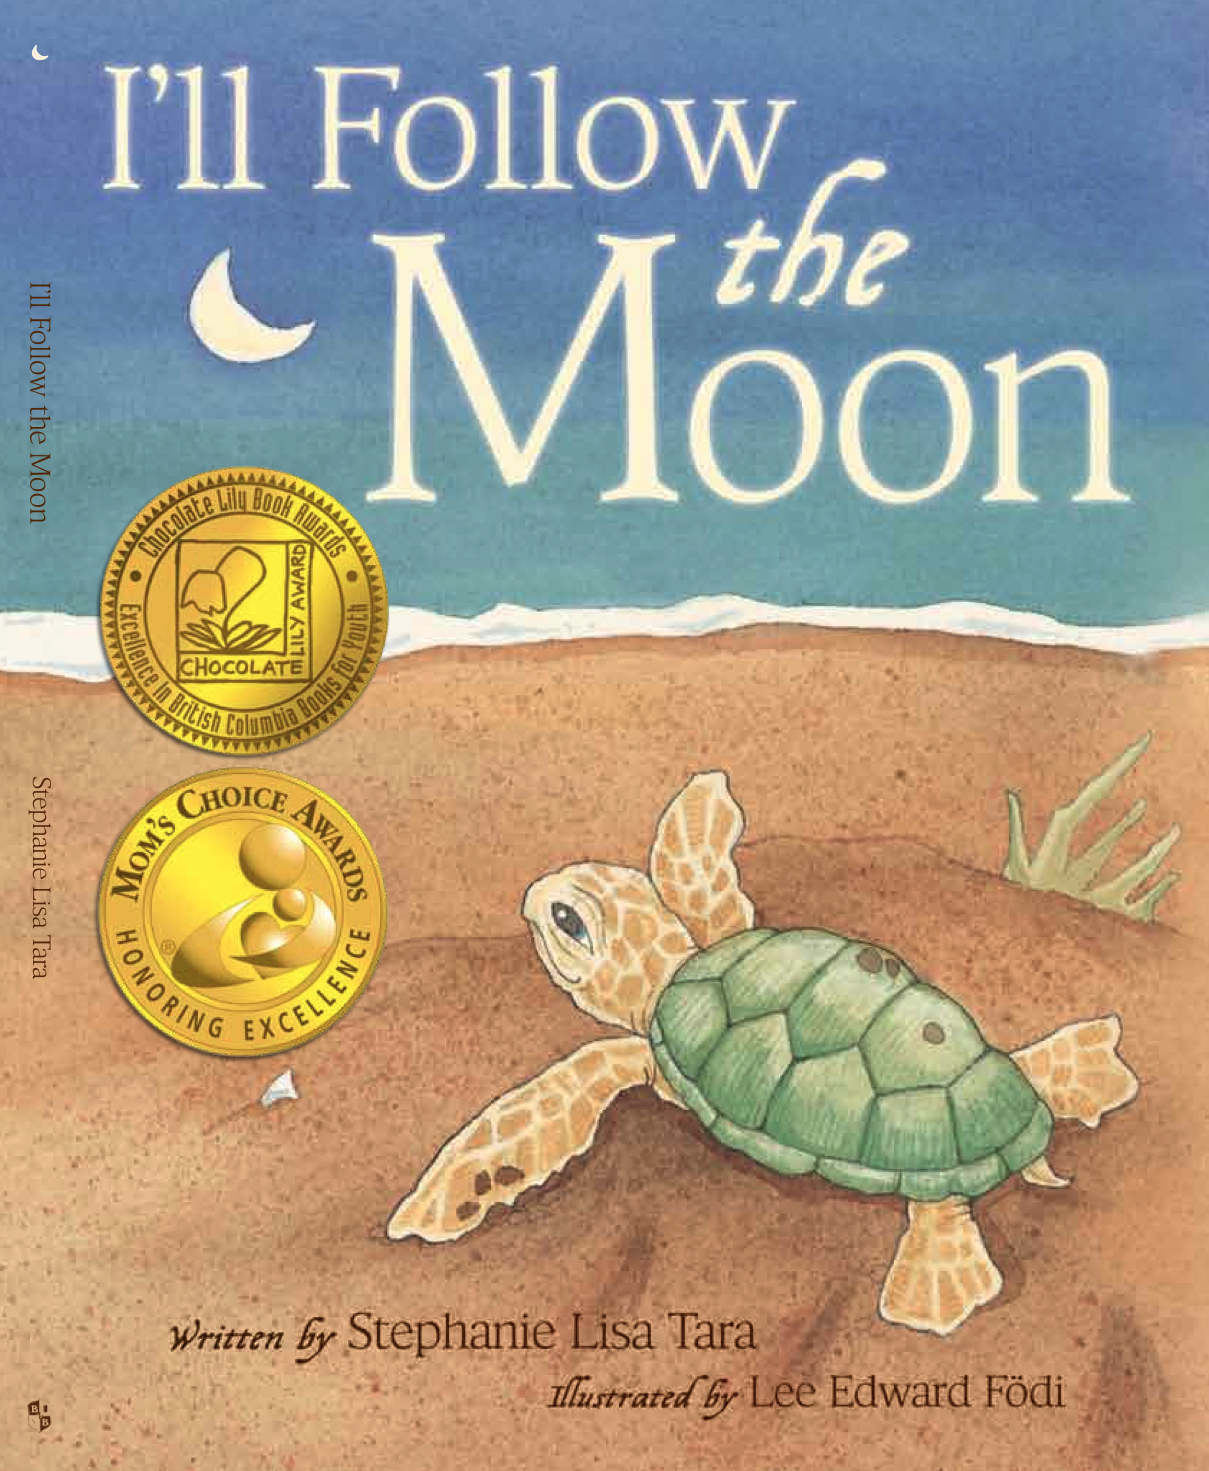 I'll Follow the Moon, by Stephanie Lisa Tara, children's book about a  hatchling